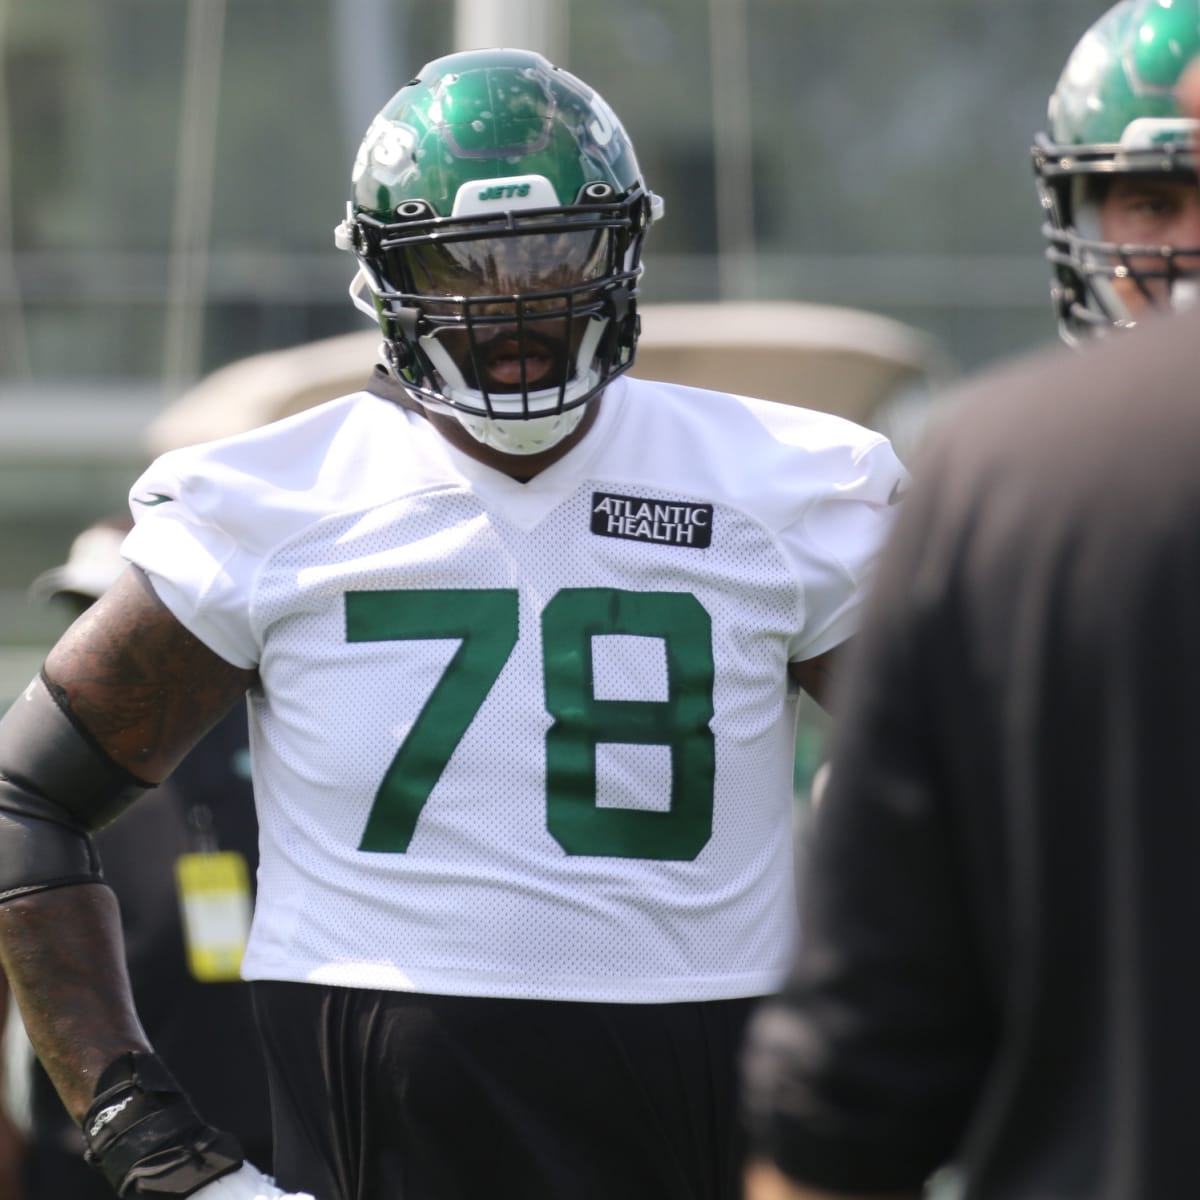 Jets training camp: New York's tackle Morgan Moses embracing role